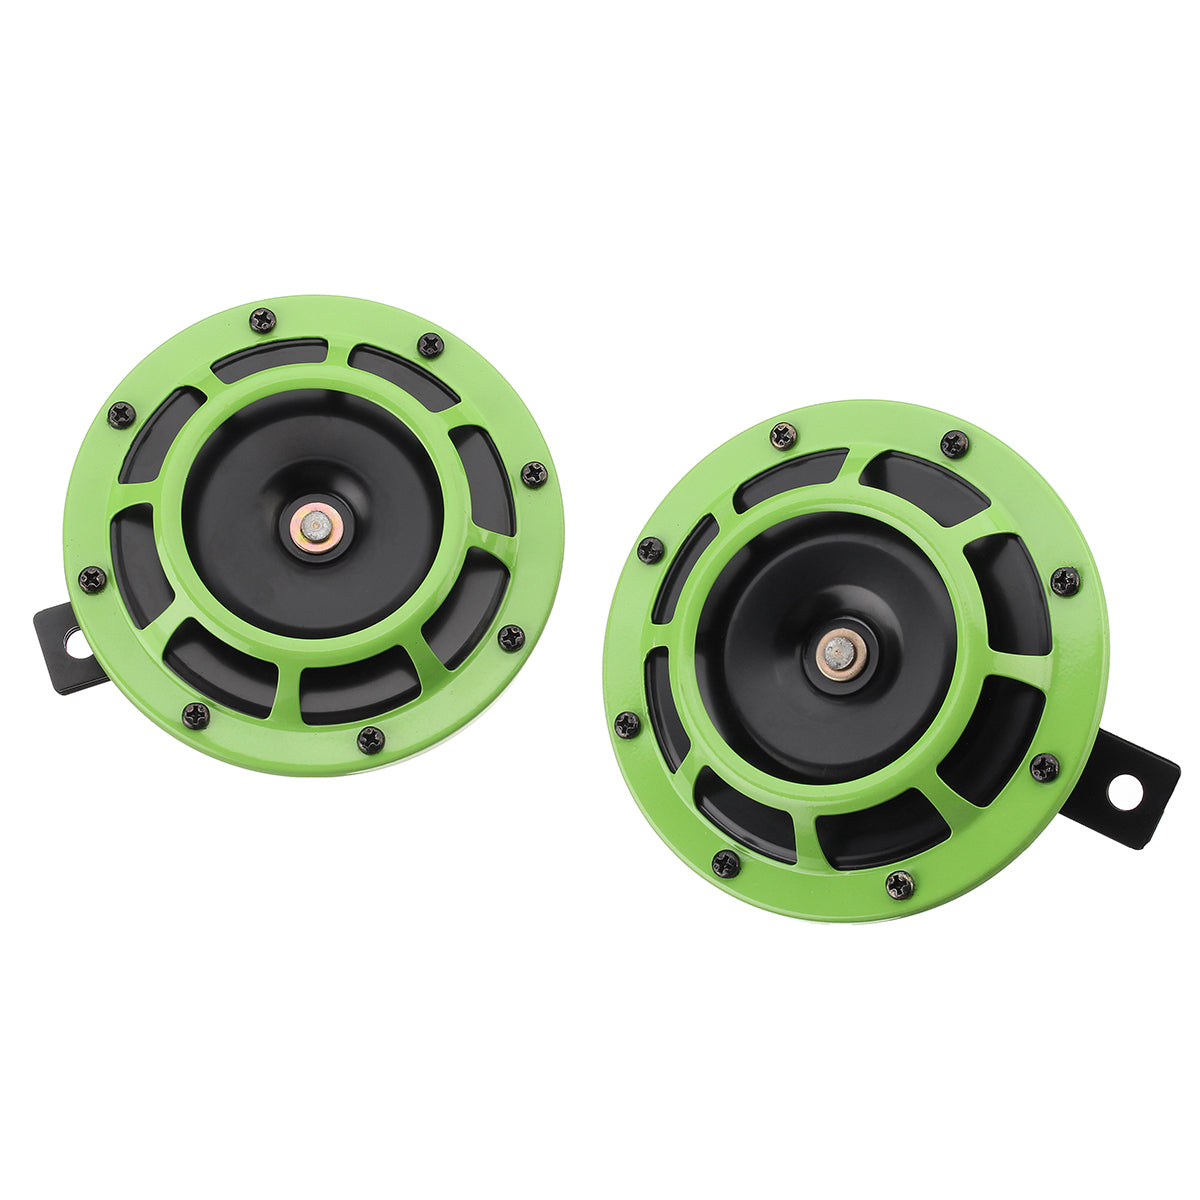 Dark Sea Green 12V 139-170dB Colorful/Green Horn Compact Super Tone Loud Blast Stainless Steel